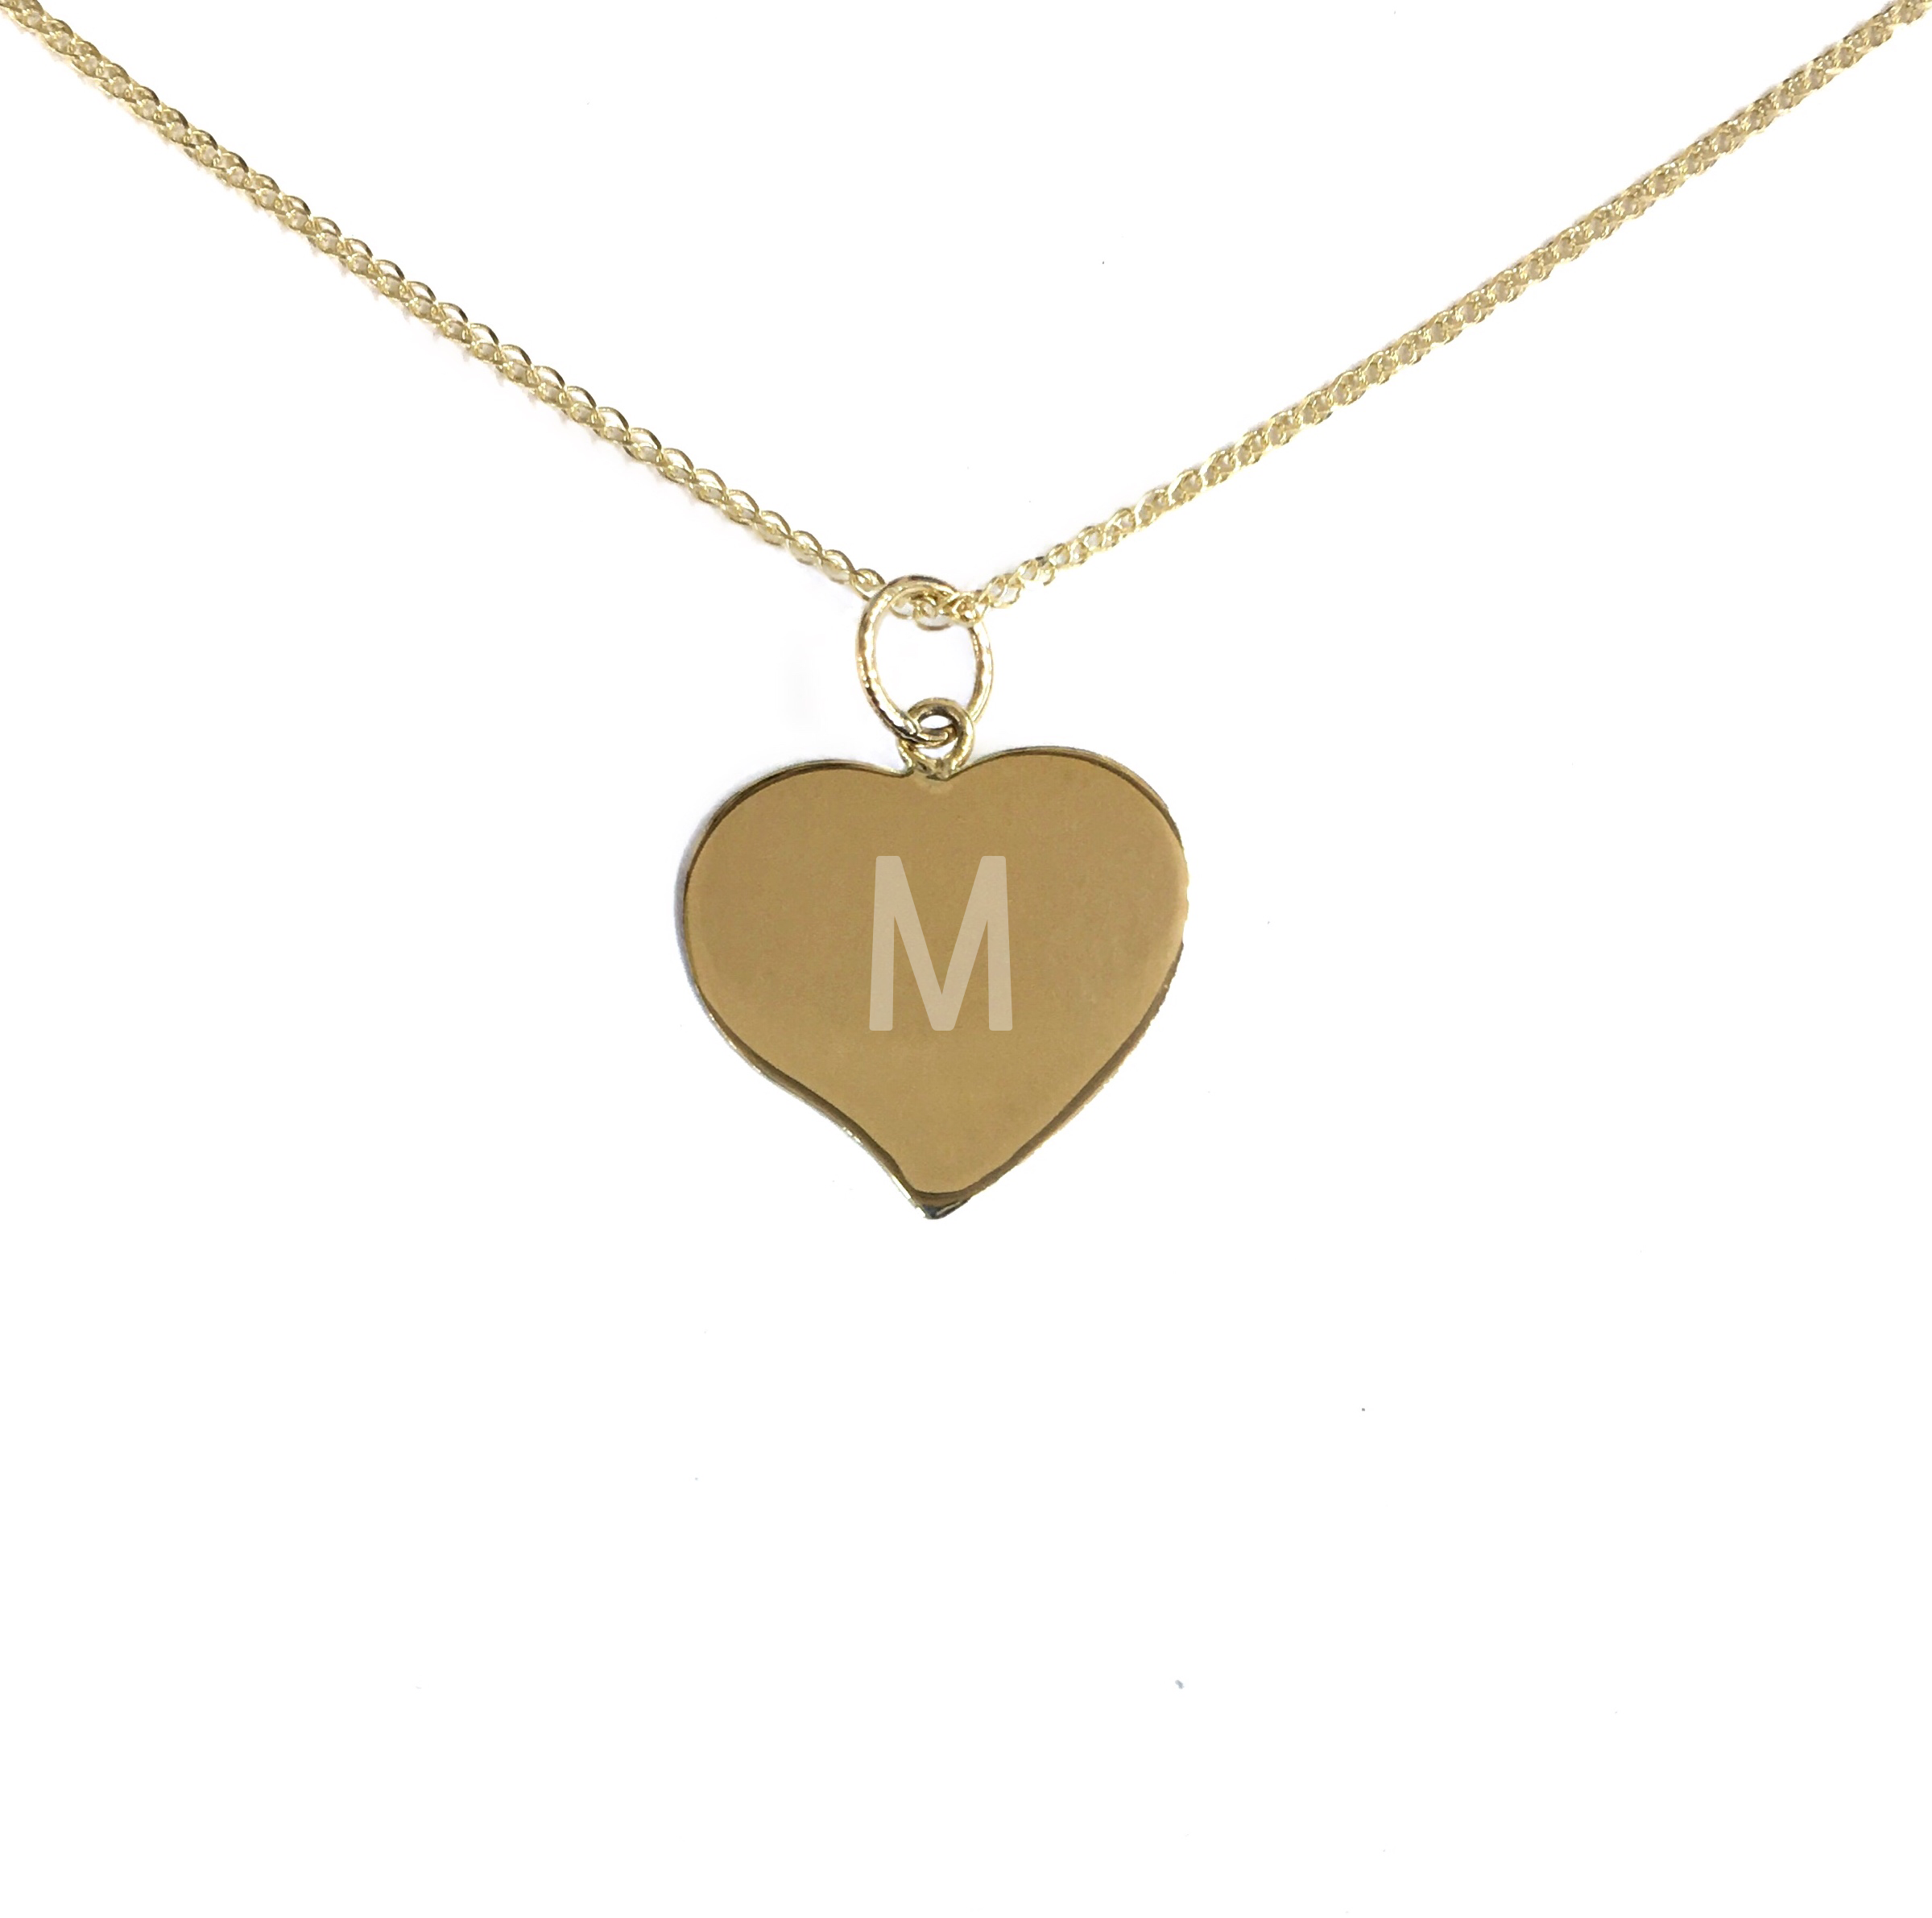 14K YELLOW GOLD POLISHED HEART NECKLACE -ENGRAVED